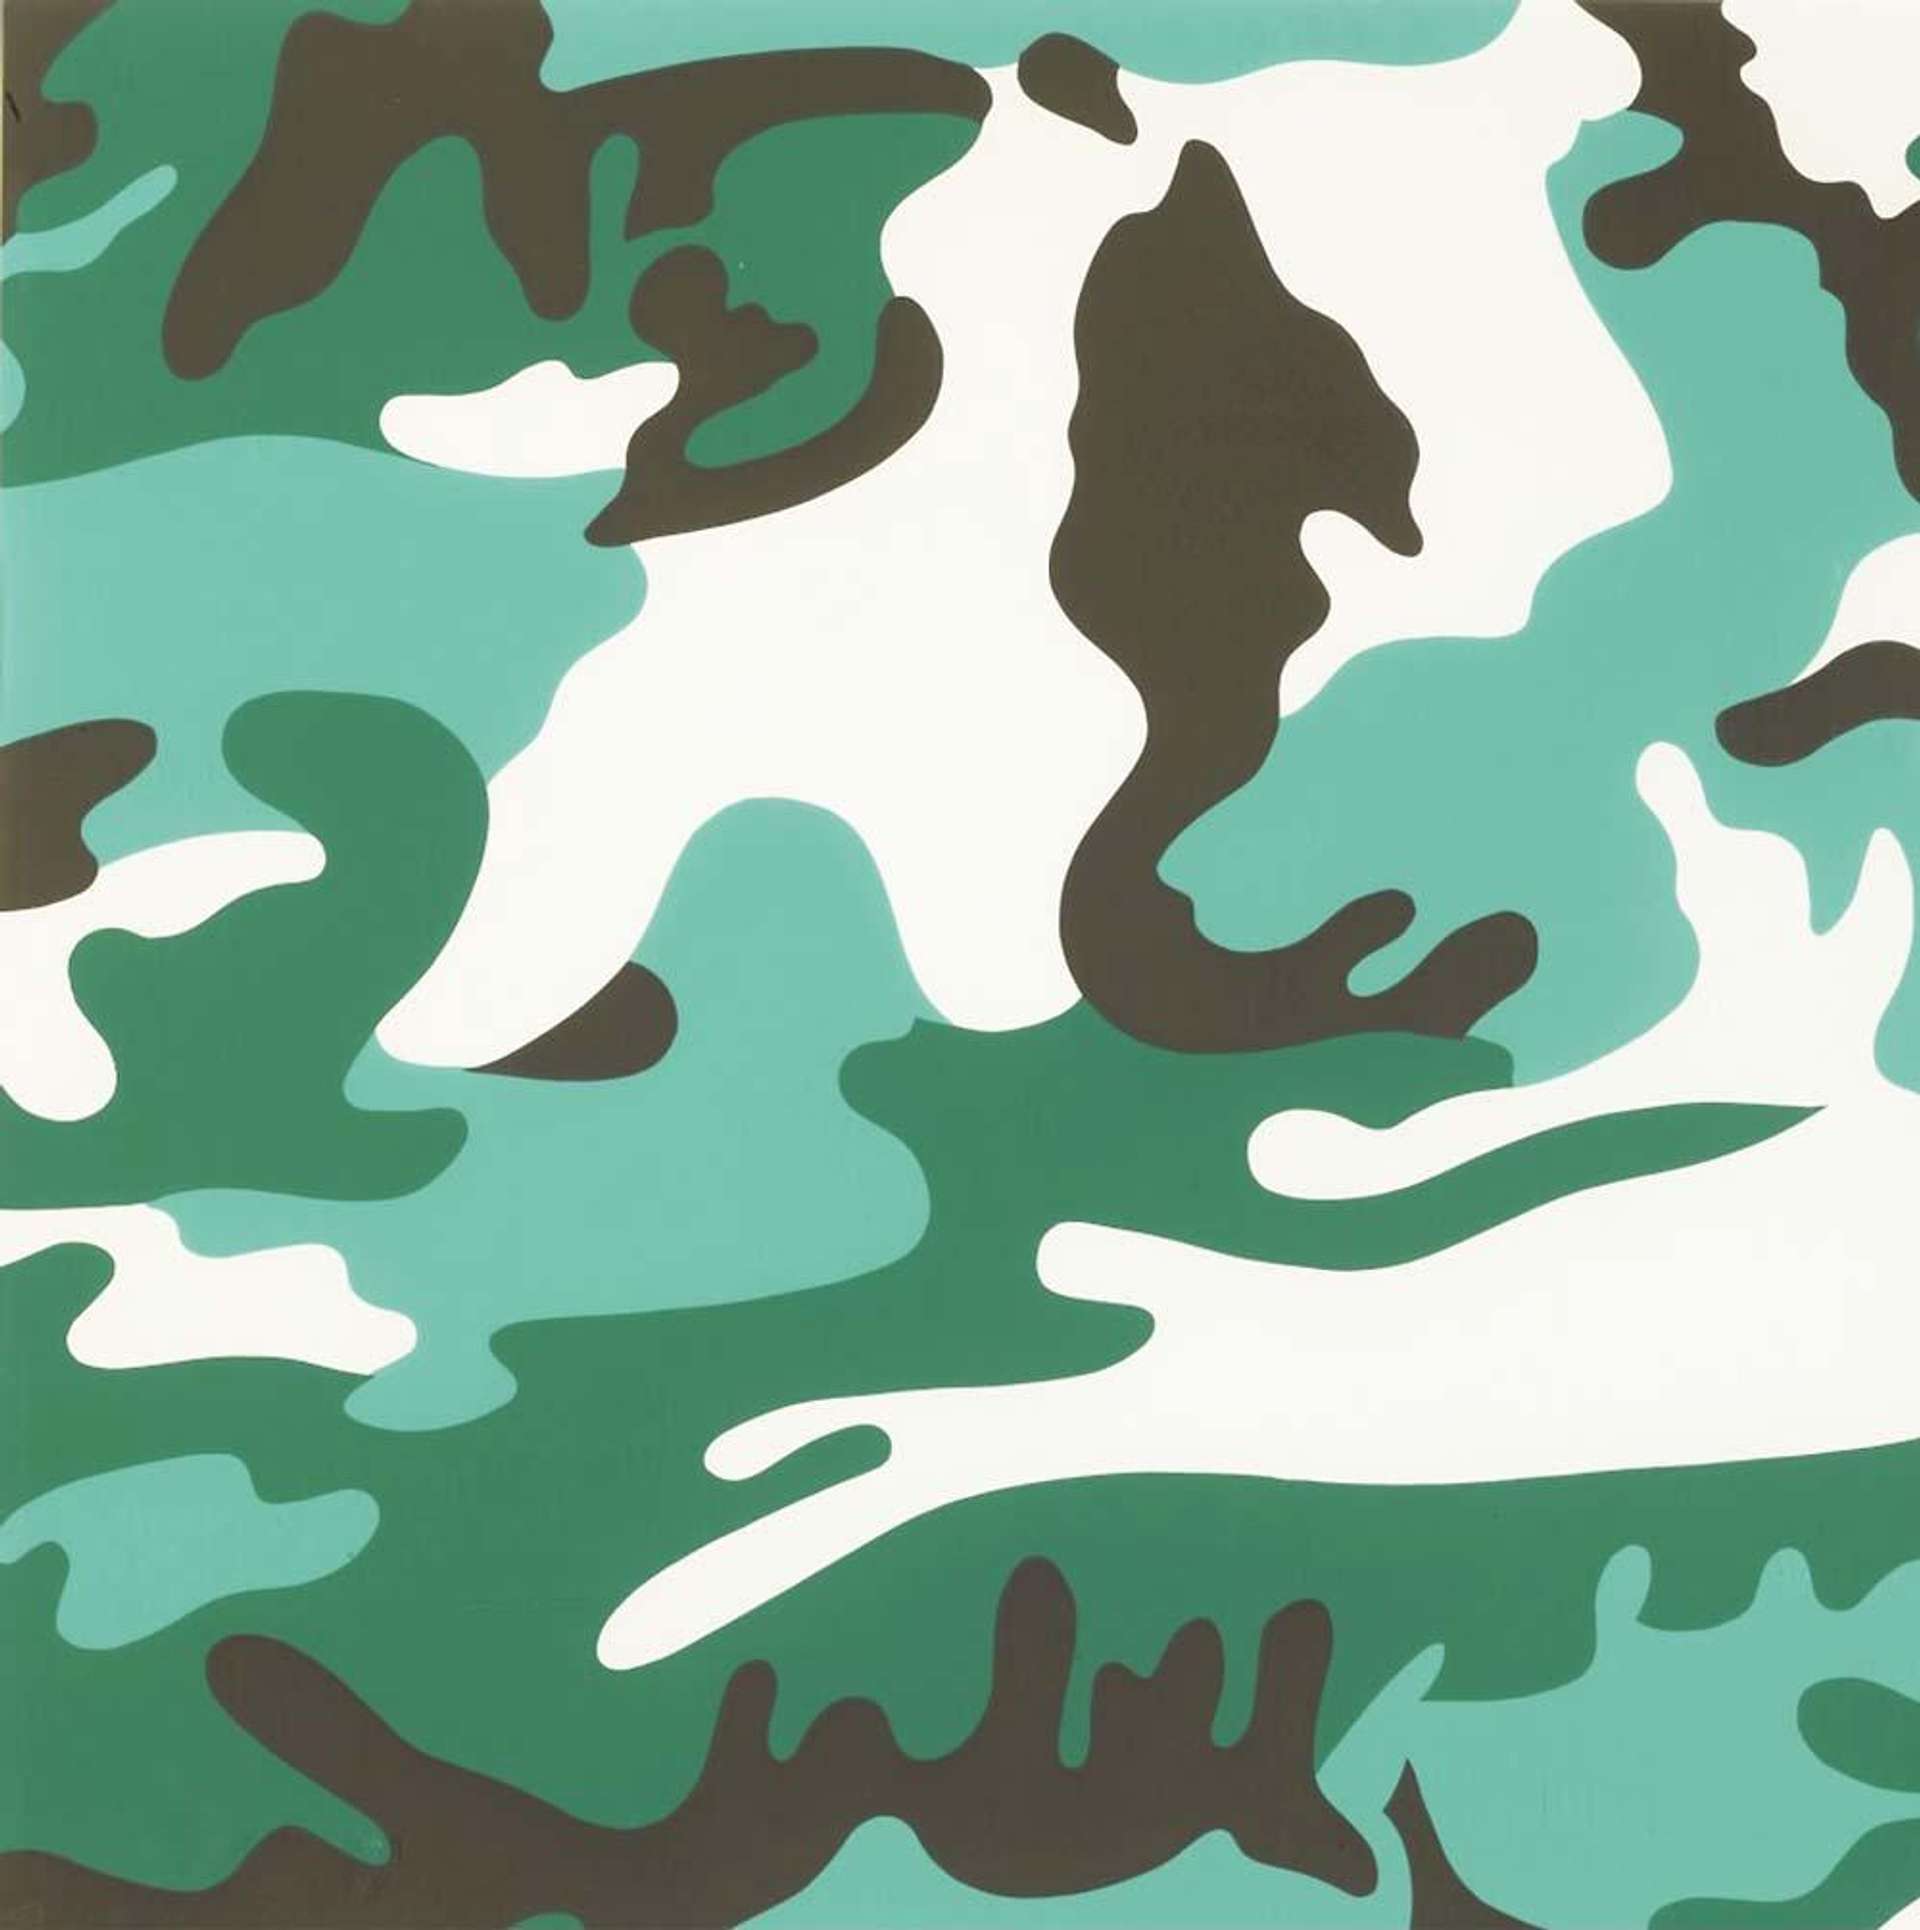 Camouflage (F. & S. II.406) by Andy Warhol